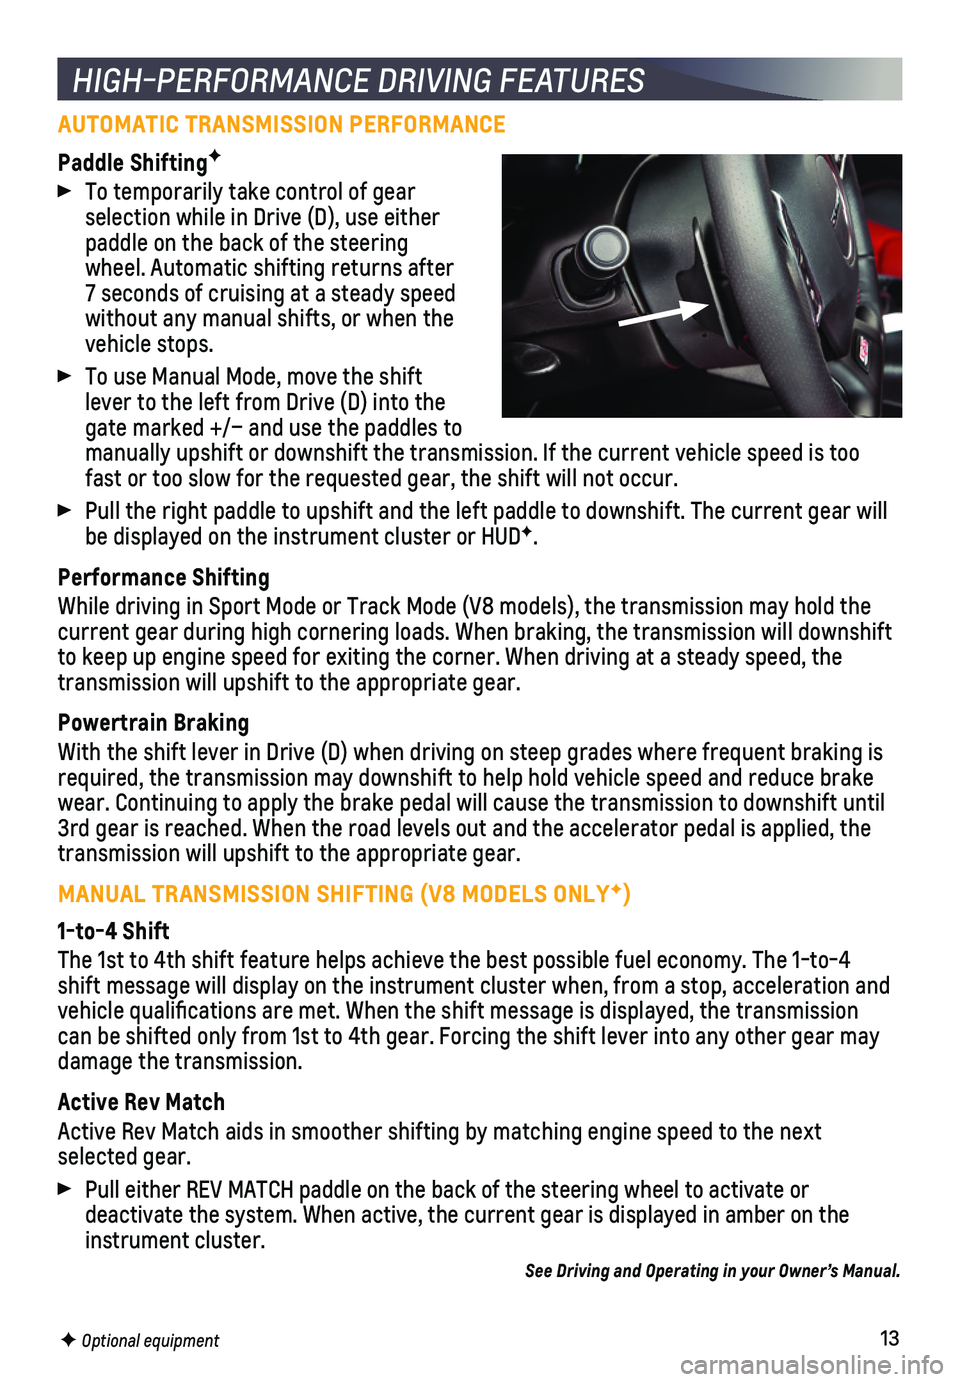 CHEVROLET CAMARO 2019  Get To Know Guide 13
AUTOMATIC TRANSMISSION PERFORMANCE
Paddle ShiftingF
 To temporarily take control of gear selection while in Drive (D), use either paddle on the back of the steering wheel. Automatic shifting return